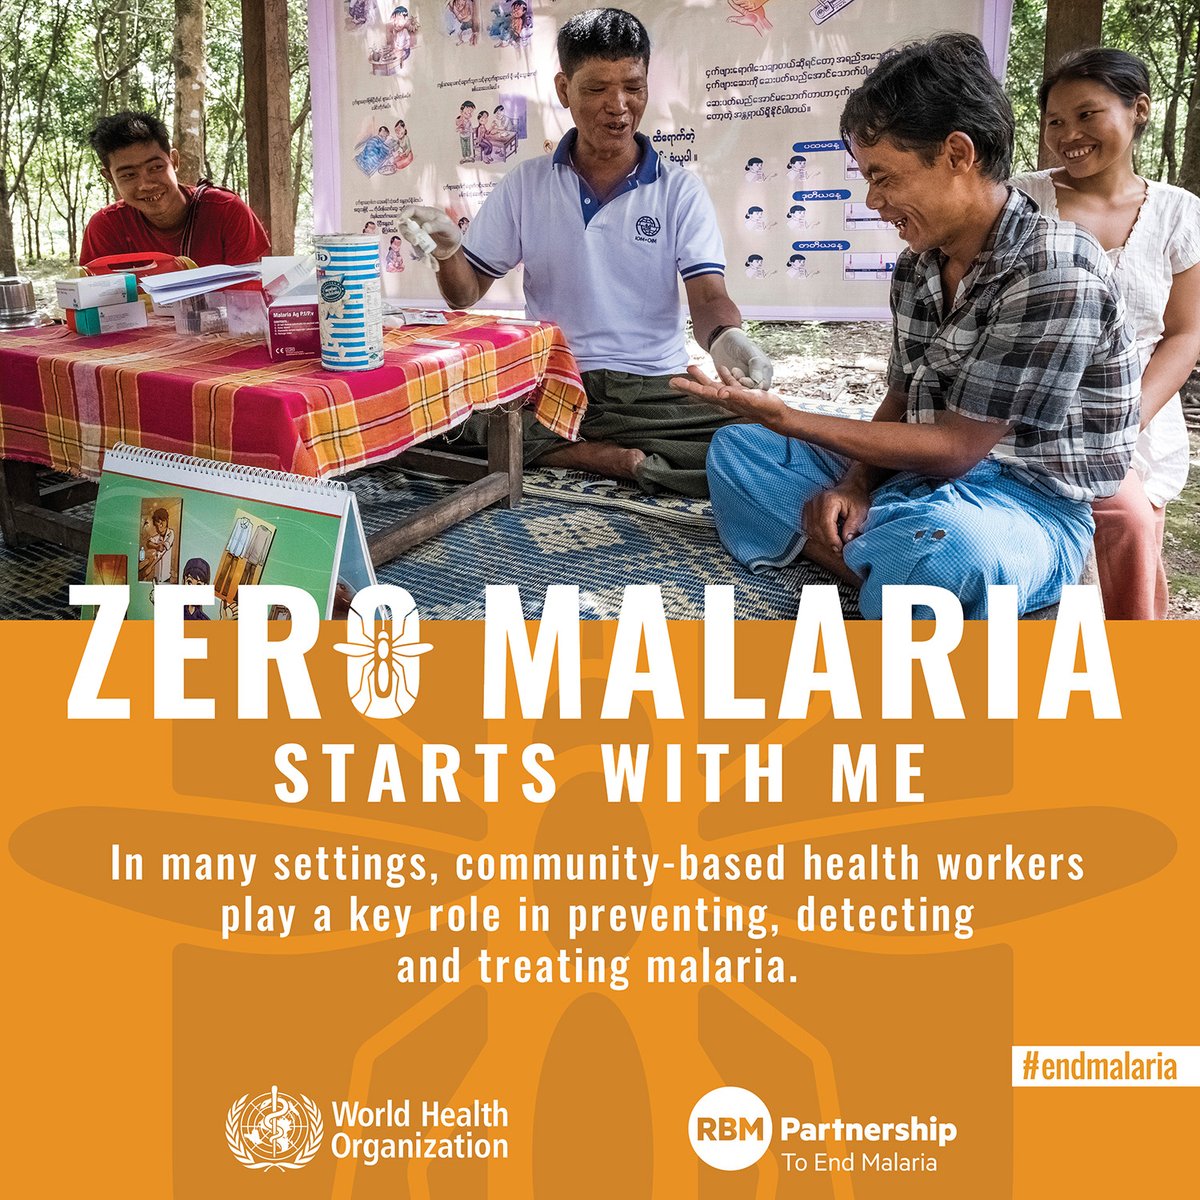 Today is  #WorldMalariaDayIn many settings, community-based healthworkers play a  role in preventing, detecting and treating  #malaria.Let's support them to  #EndMalaria!  https://bit.ly/32uKPFH 